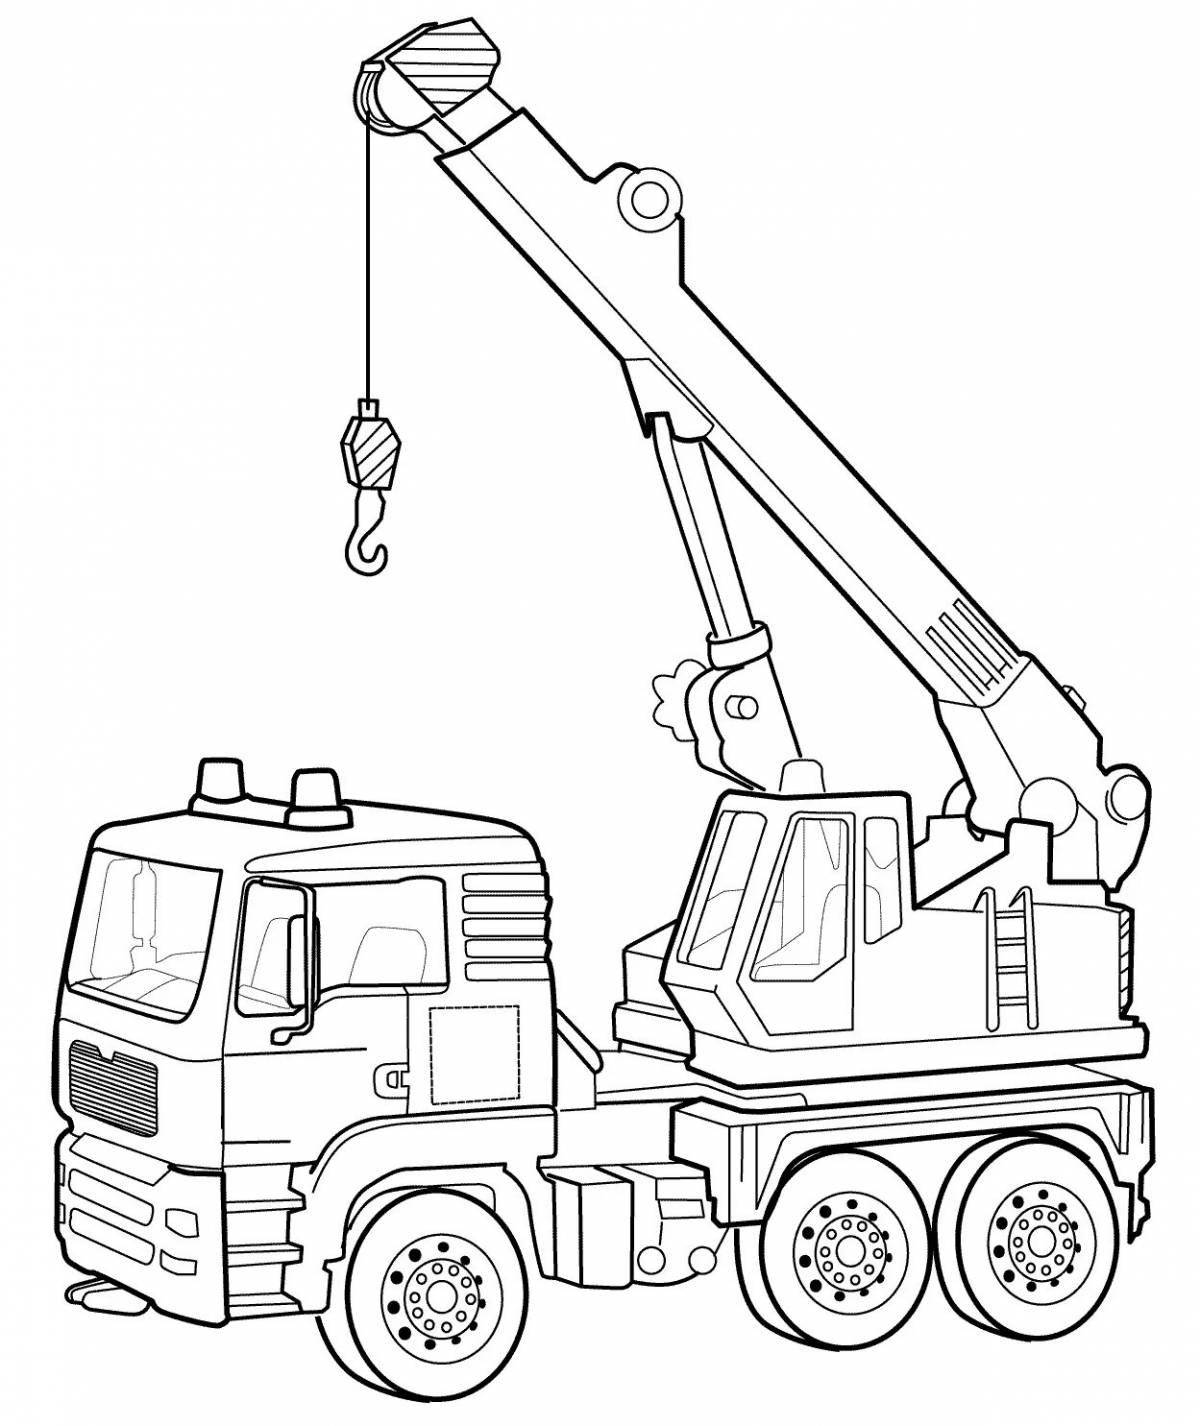 Incredible construction vehicle coloring book for boys